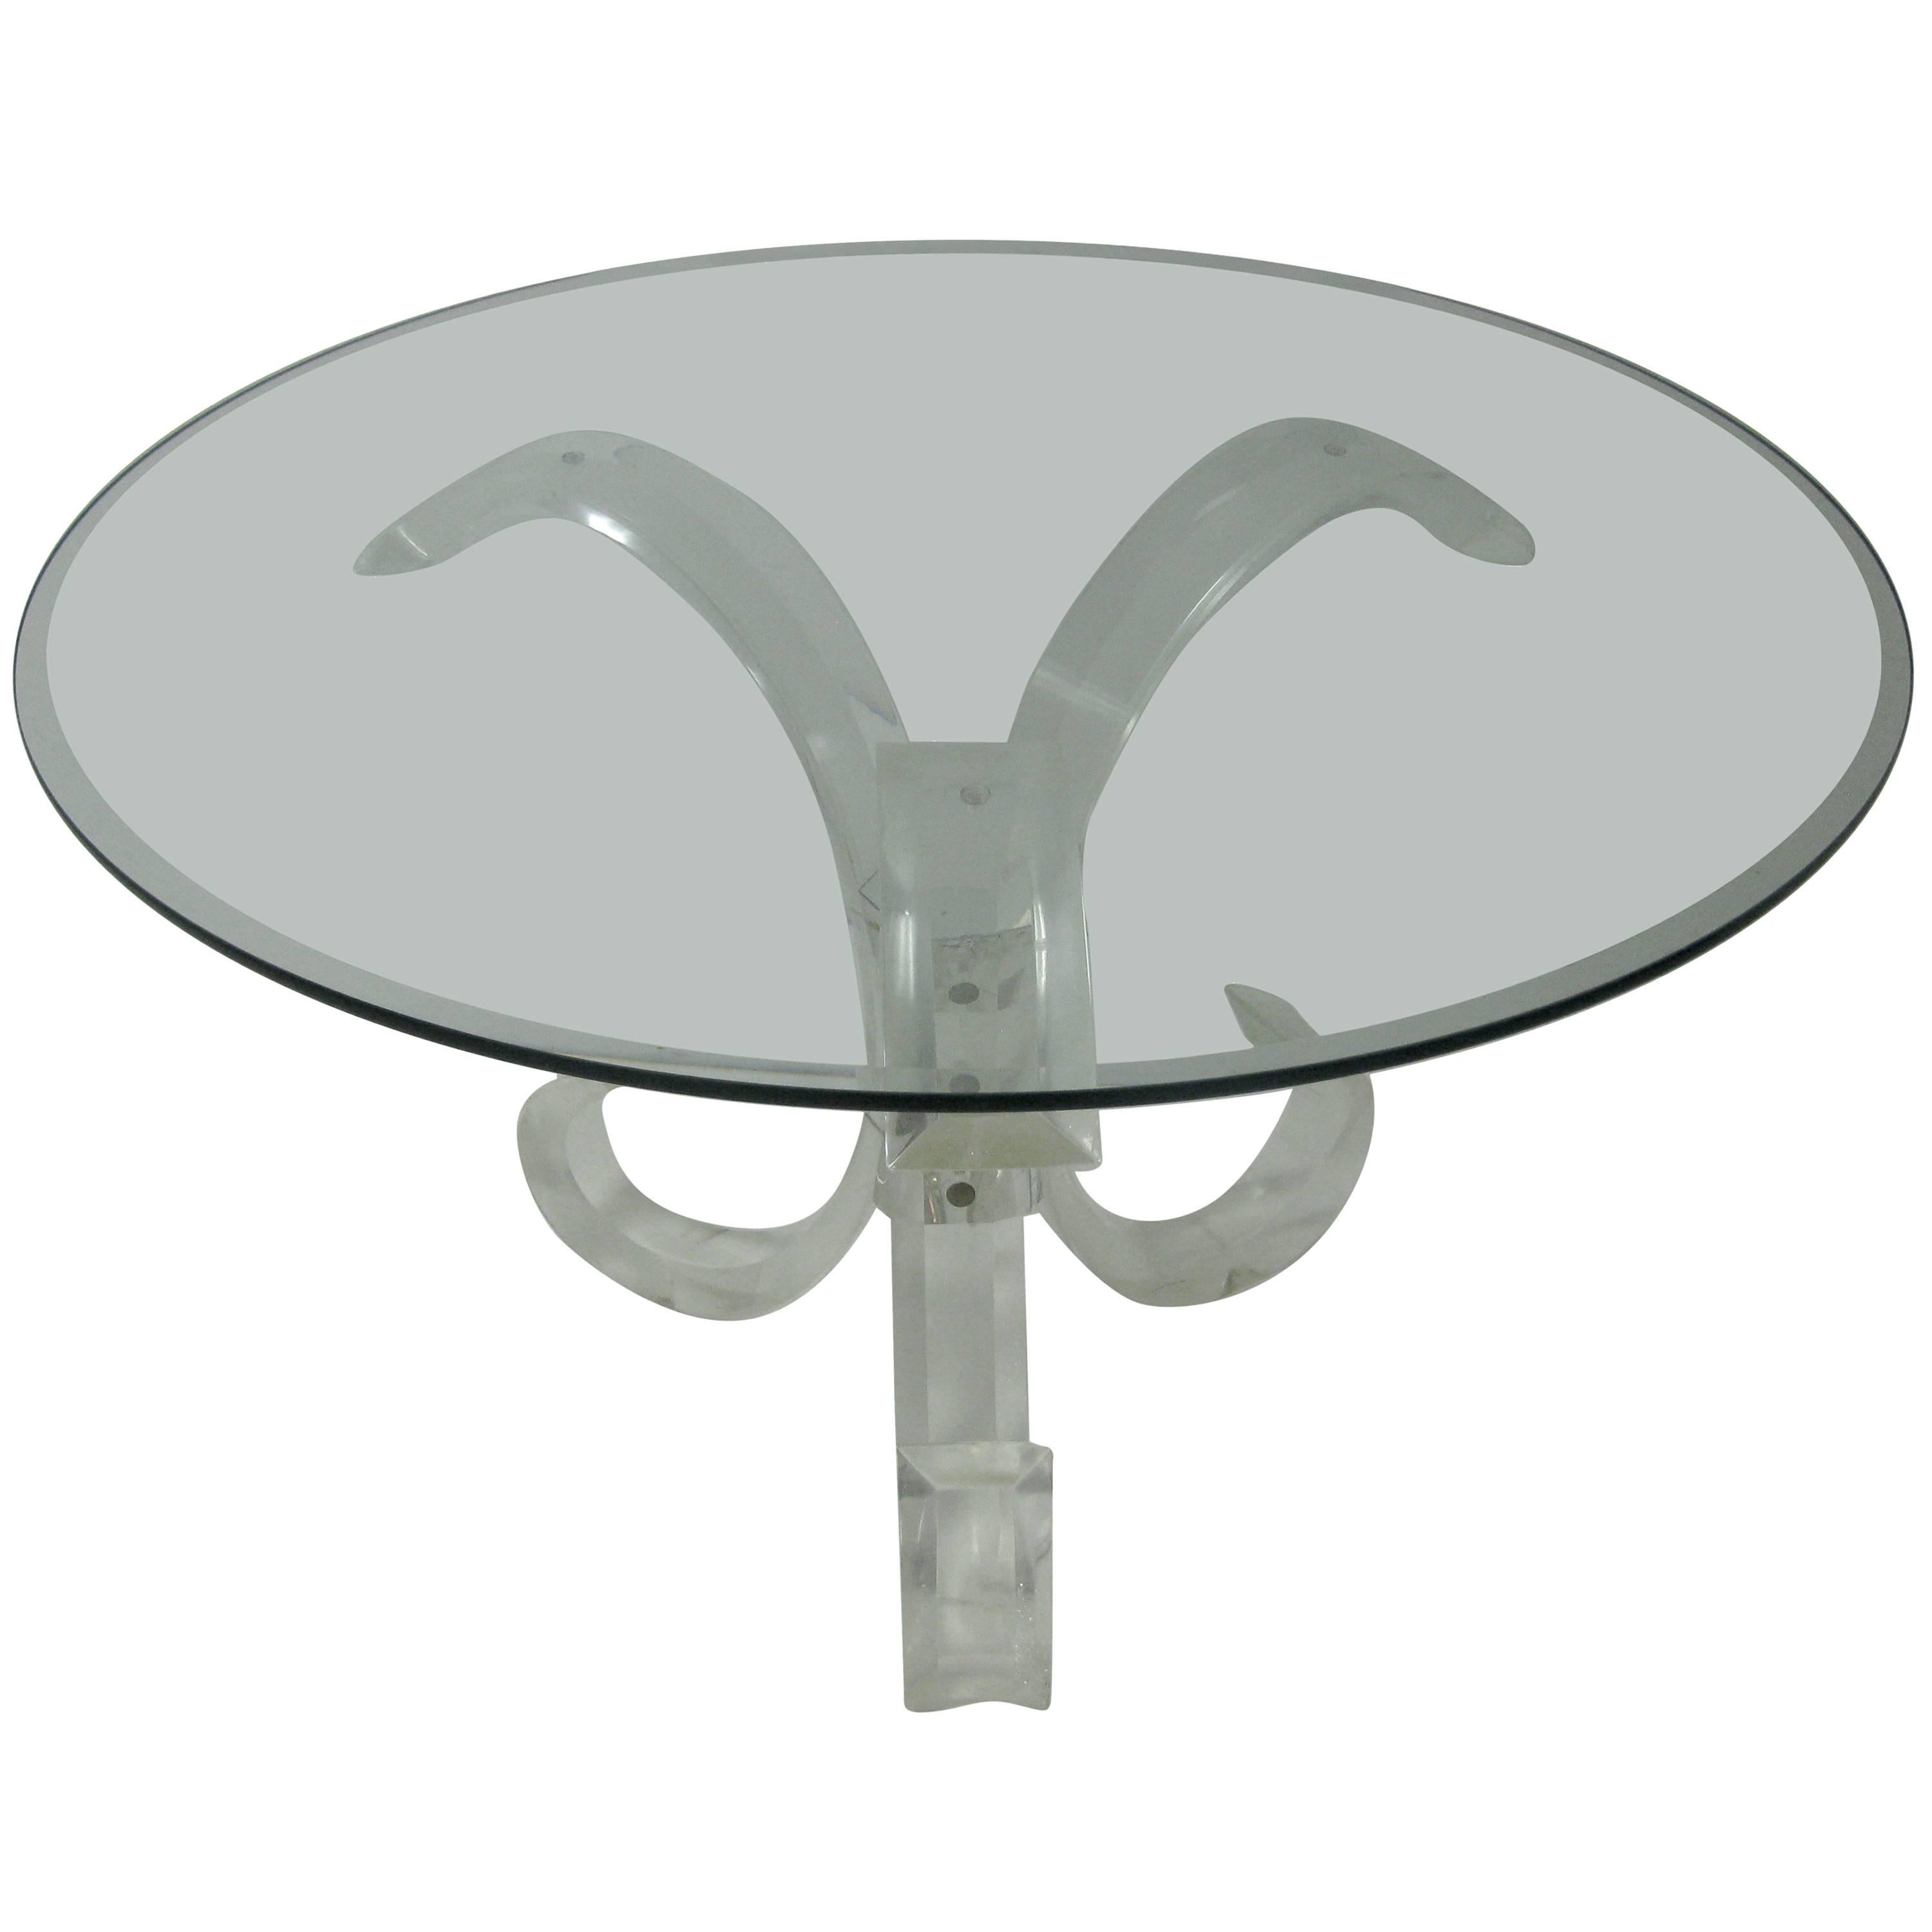 Round Lucite Dining Room Table For Sale At 1stdibs